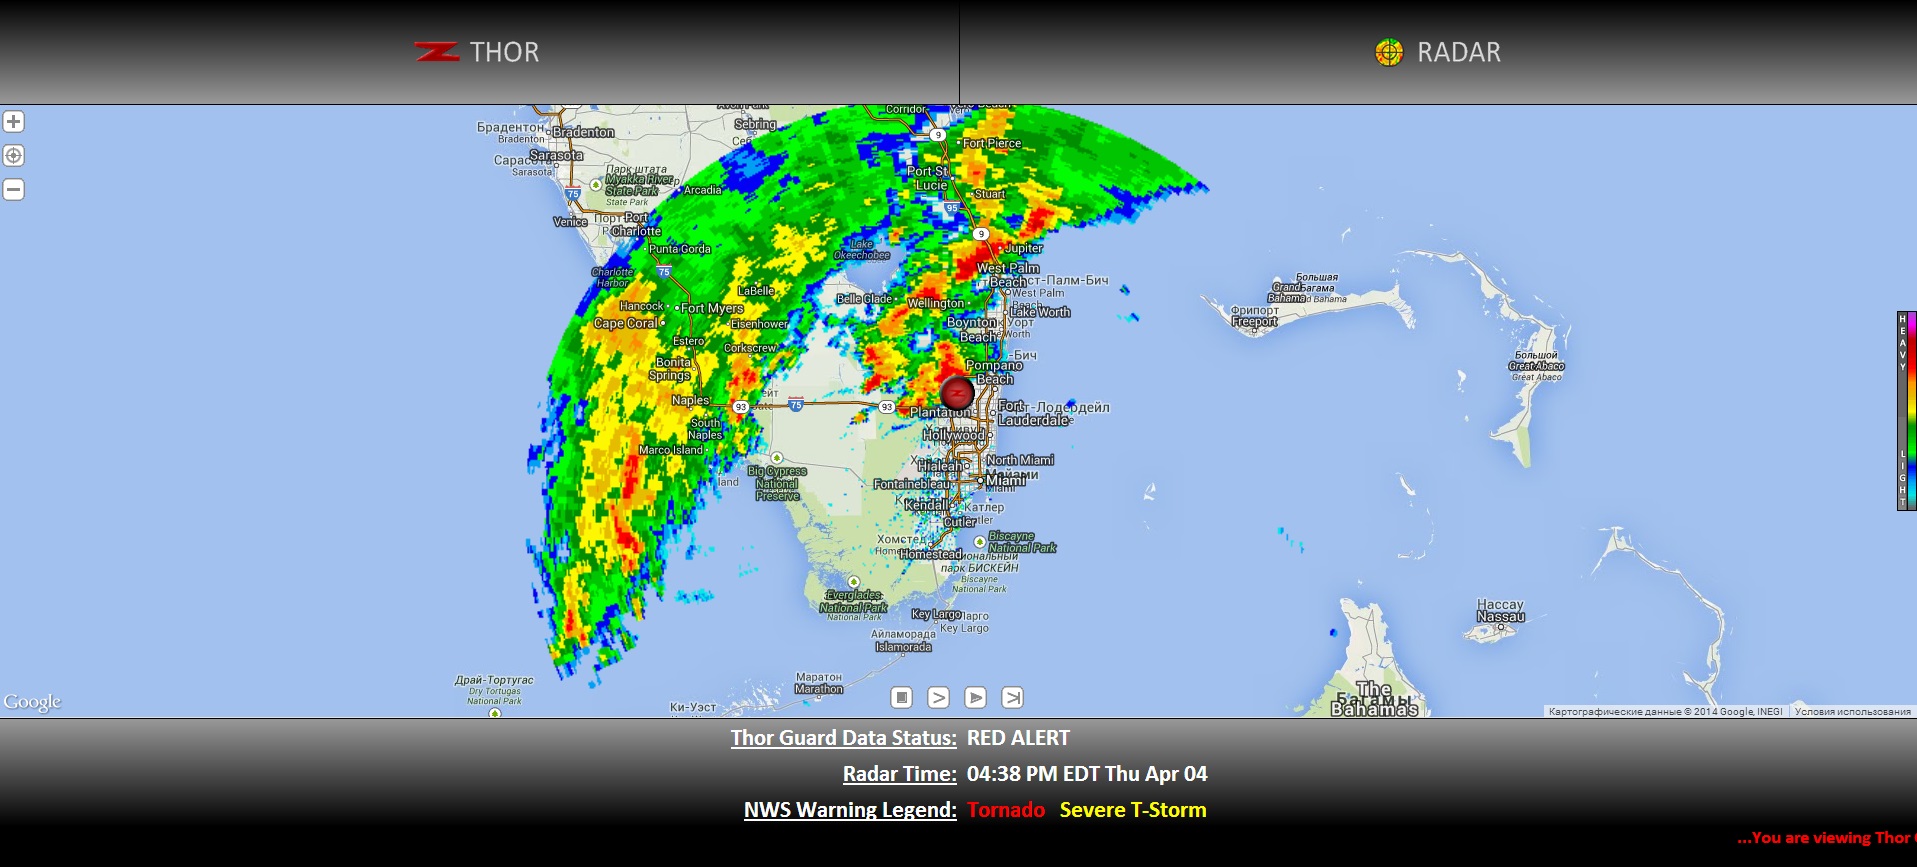 By switching to the Radar tab, you can see live meteorological conditions on the map